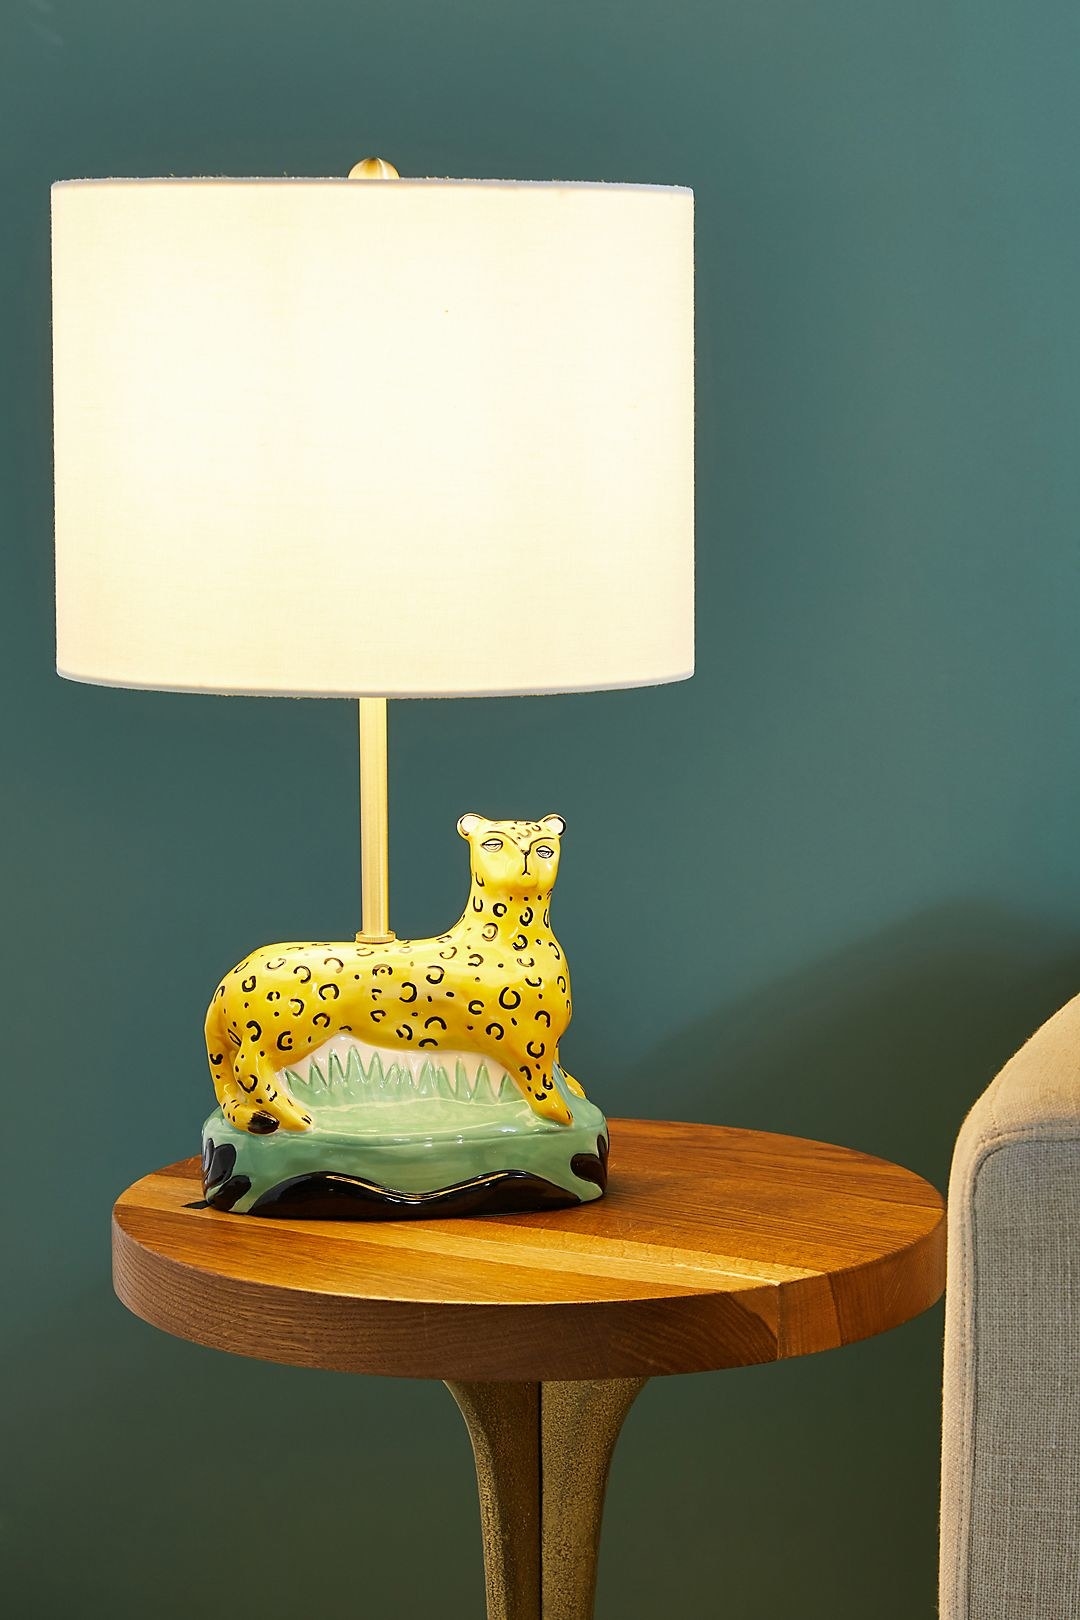 the cheetah table lamp with a simple white shade